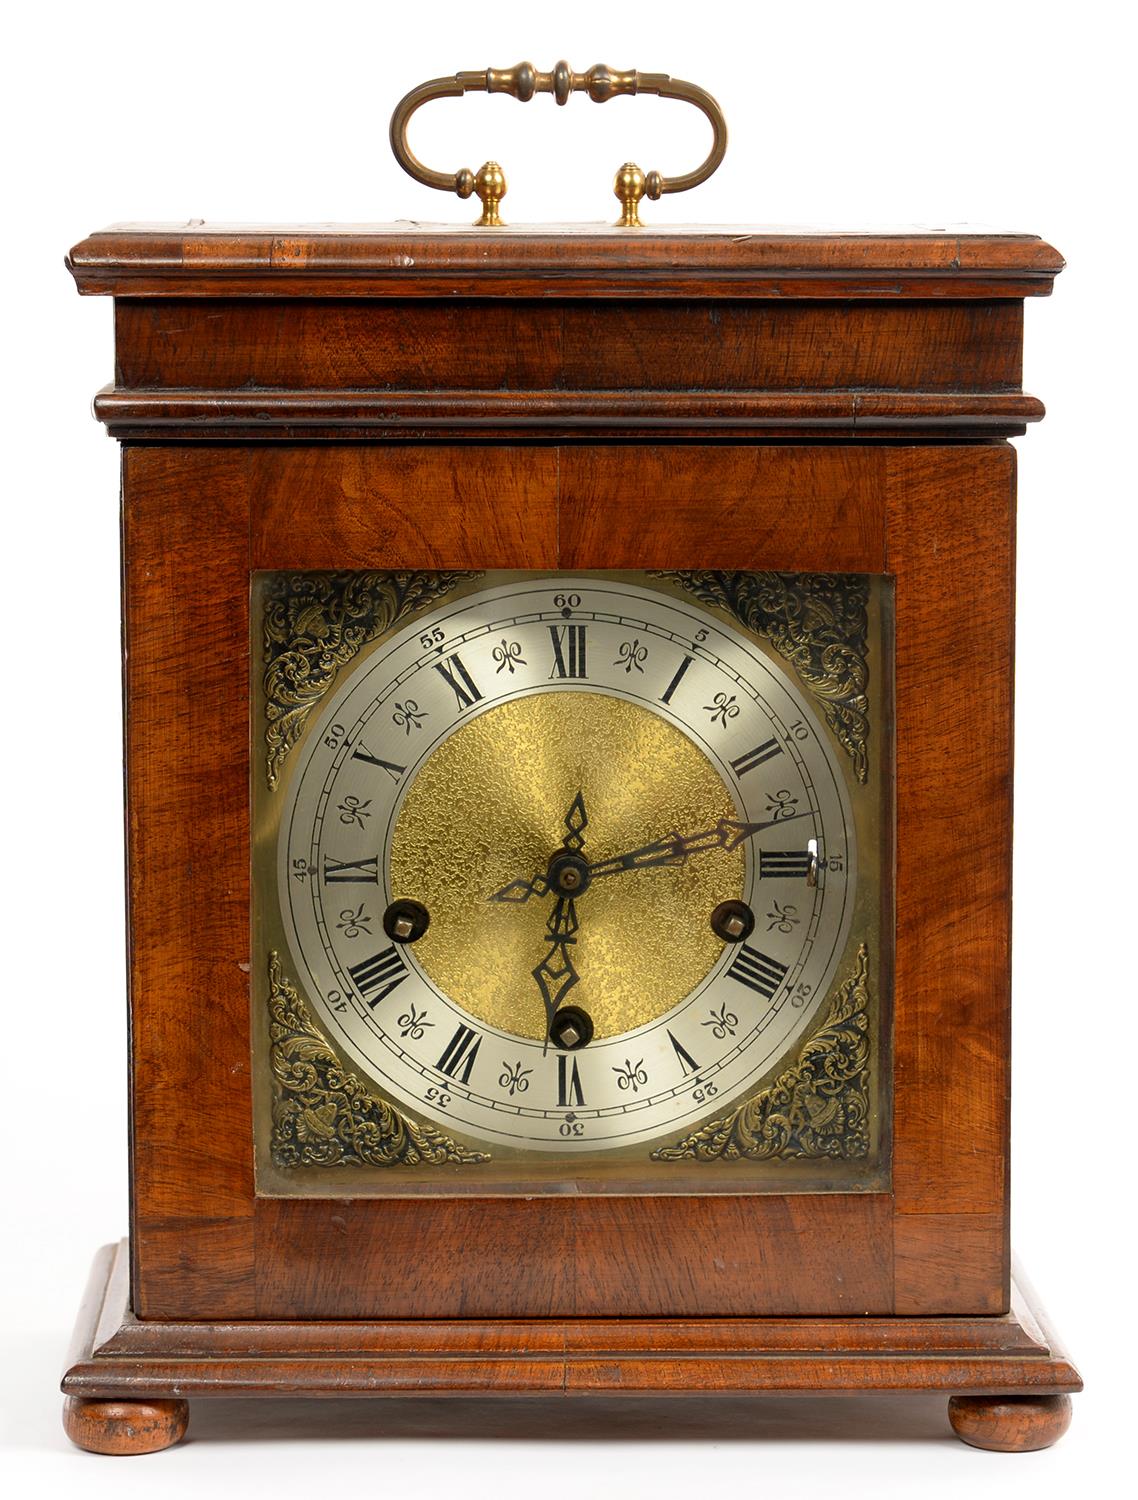 A WALNUT AND FEATHER BANDED TABLE WITH CLOCK IN LATE 17TH C ENGLISH STYLE, BRASS DIAL AND ROD GONG